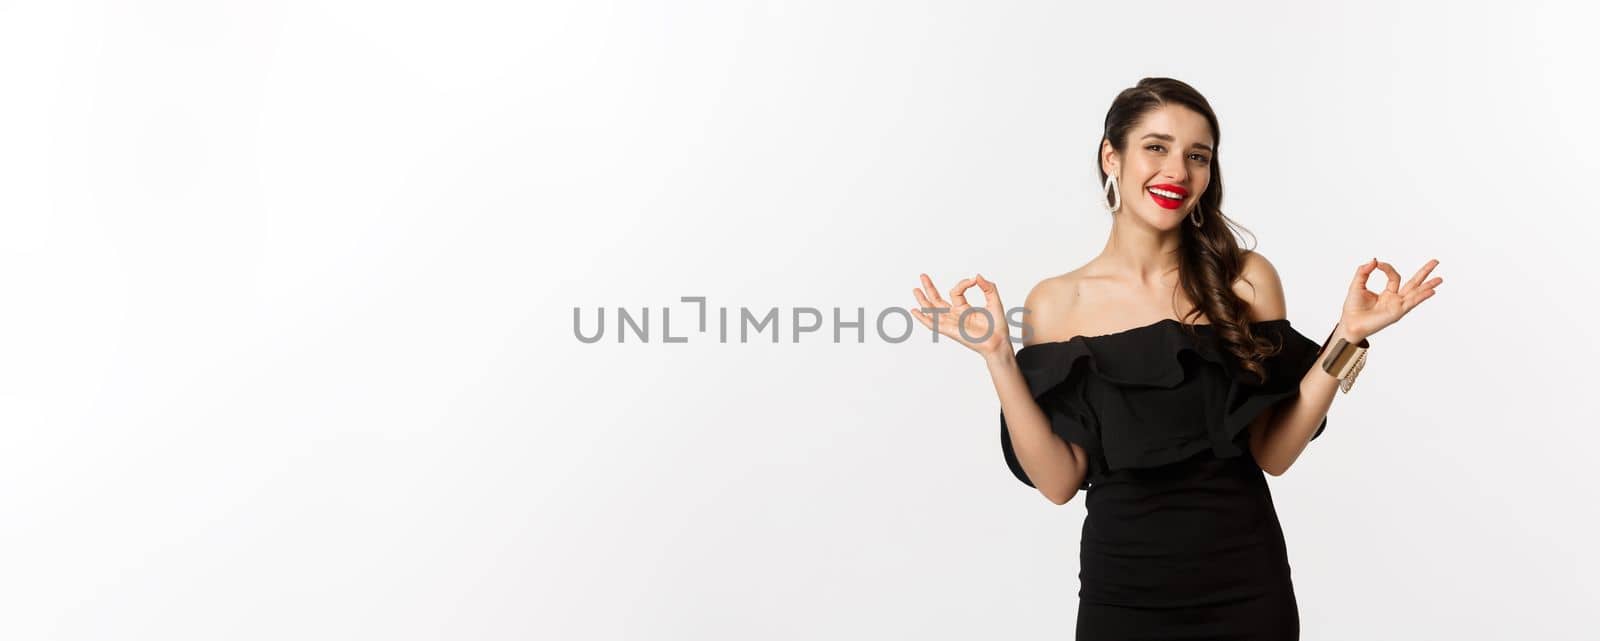 Fashion and beauty. Attractive brunette woman in black dress, showing okay signs and smiling satisfied, approve and recommend, standing over white background.